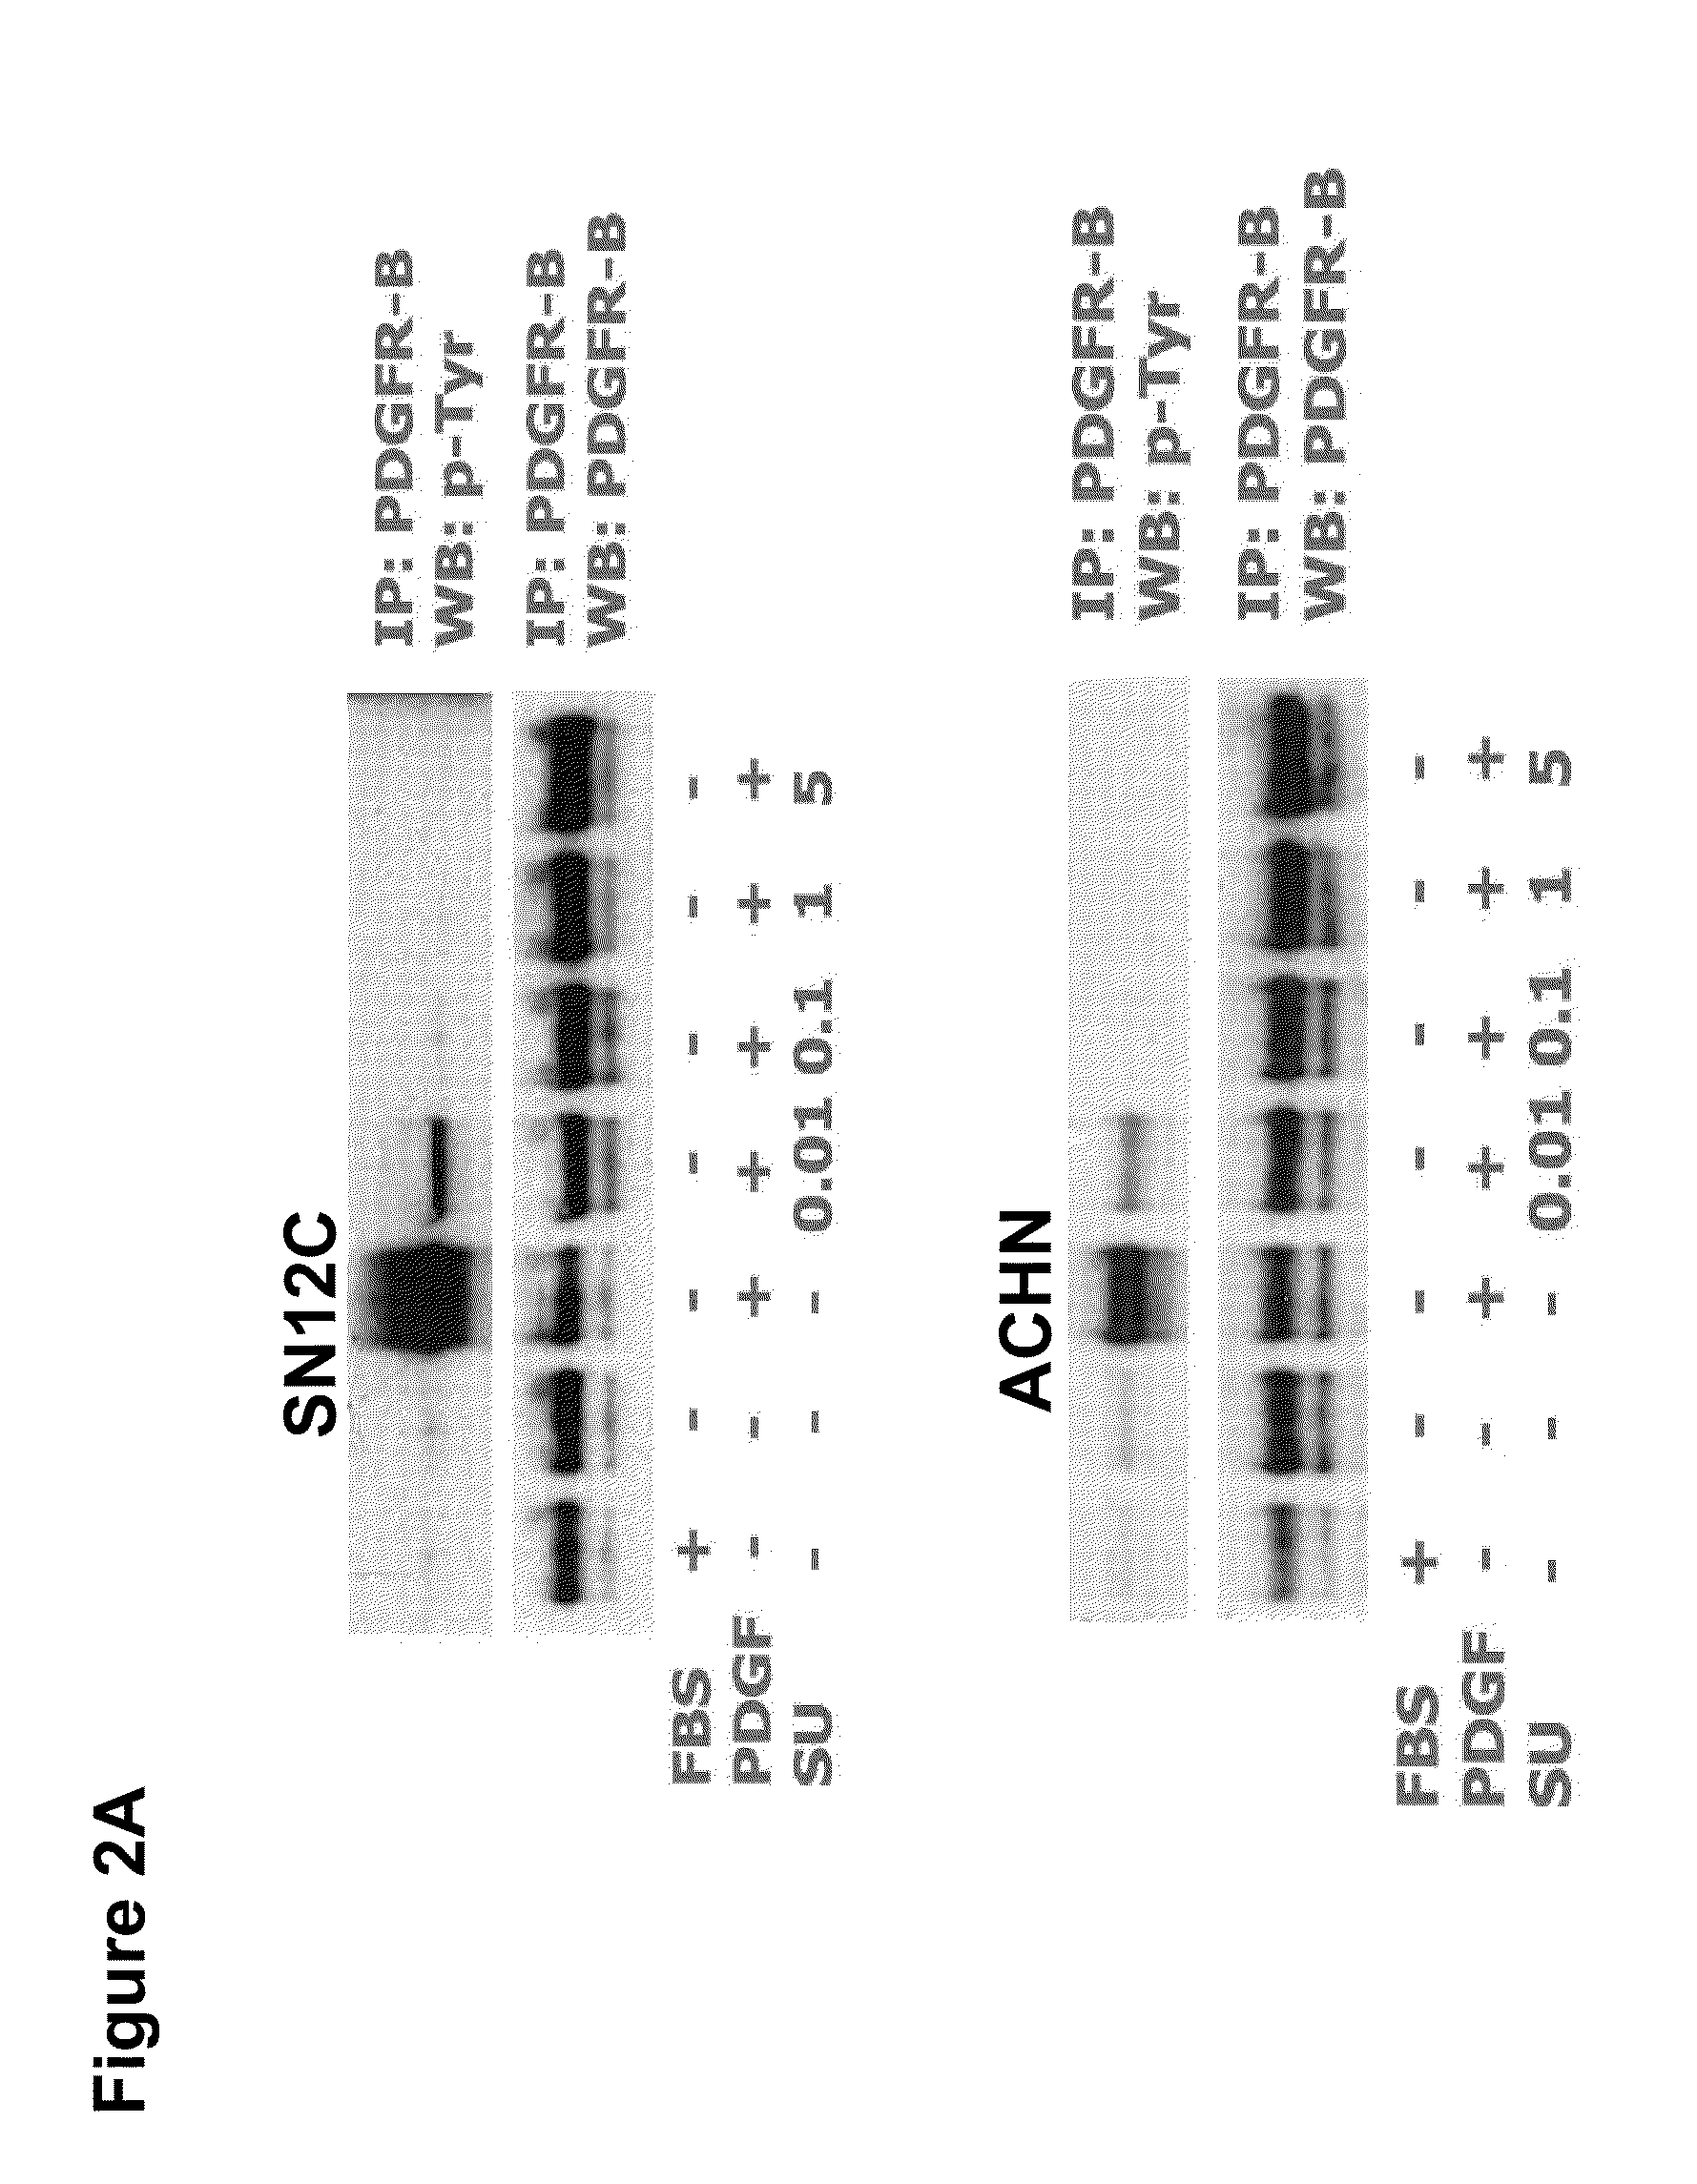 Methods for treating sunitinib-resistant carcinoma and related biomarkers